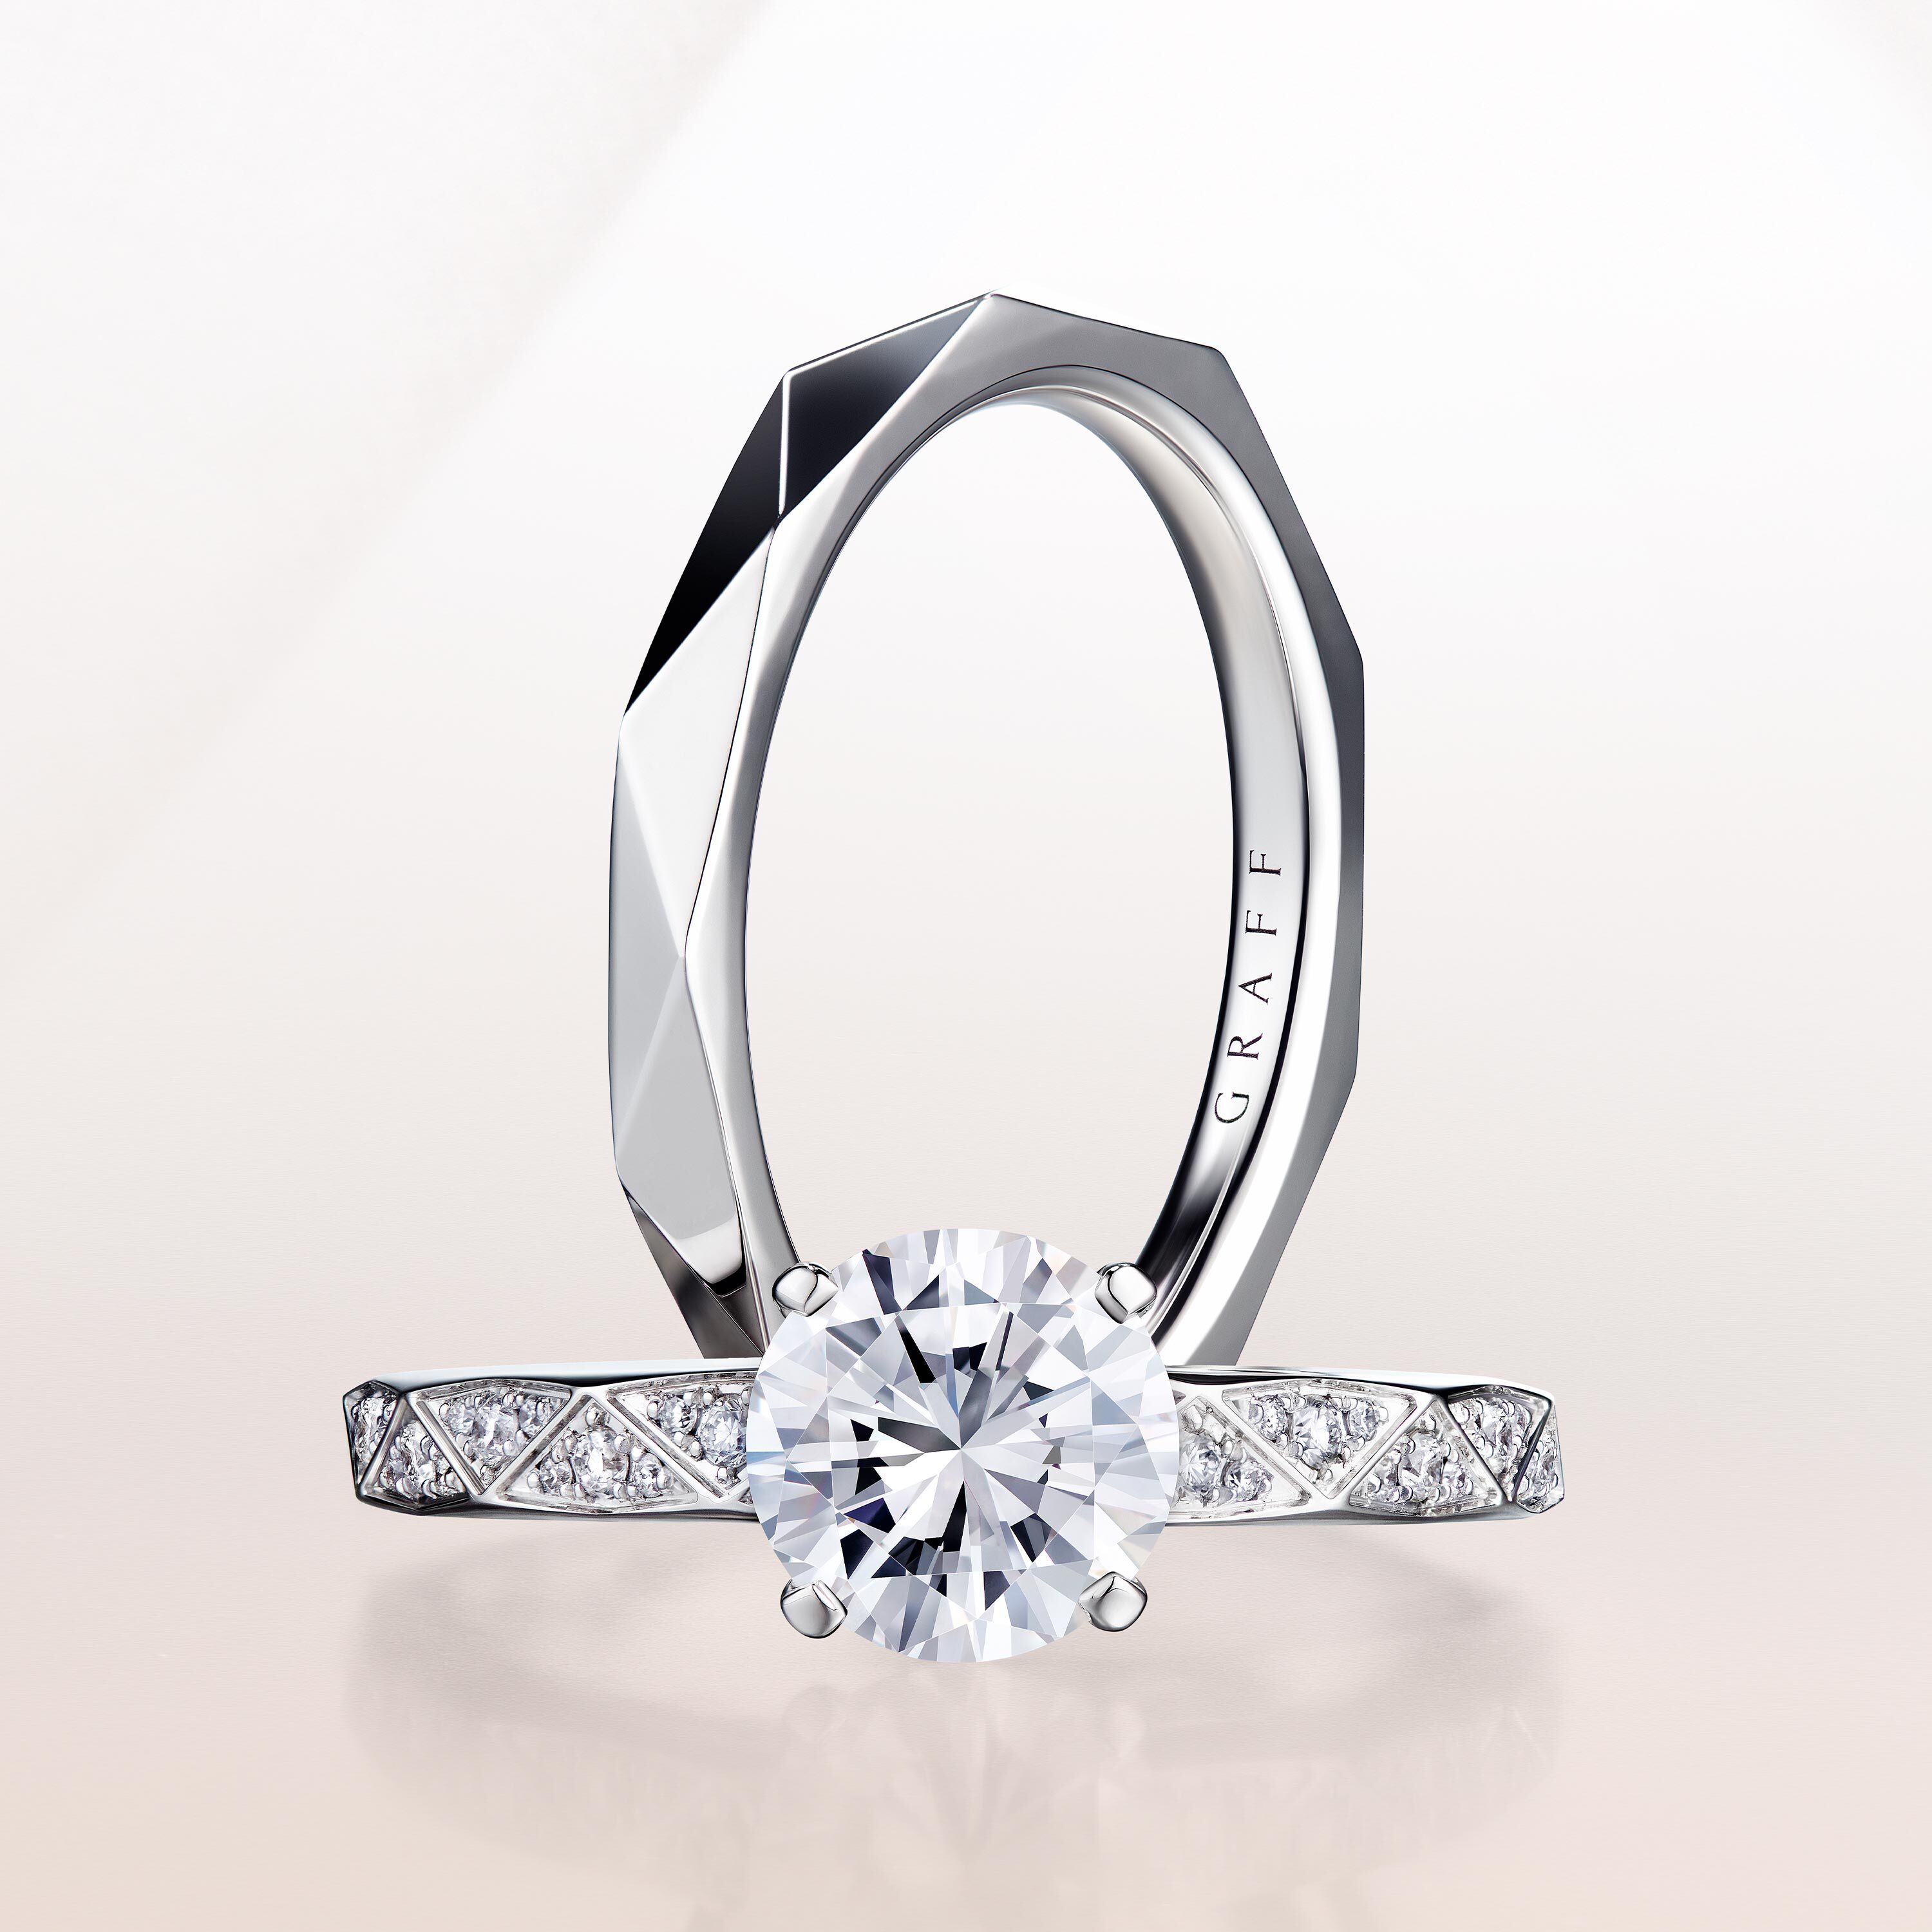 A Laurence Graff Signature wedding band and a diamond engagement ring